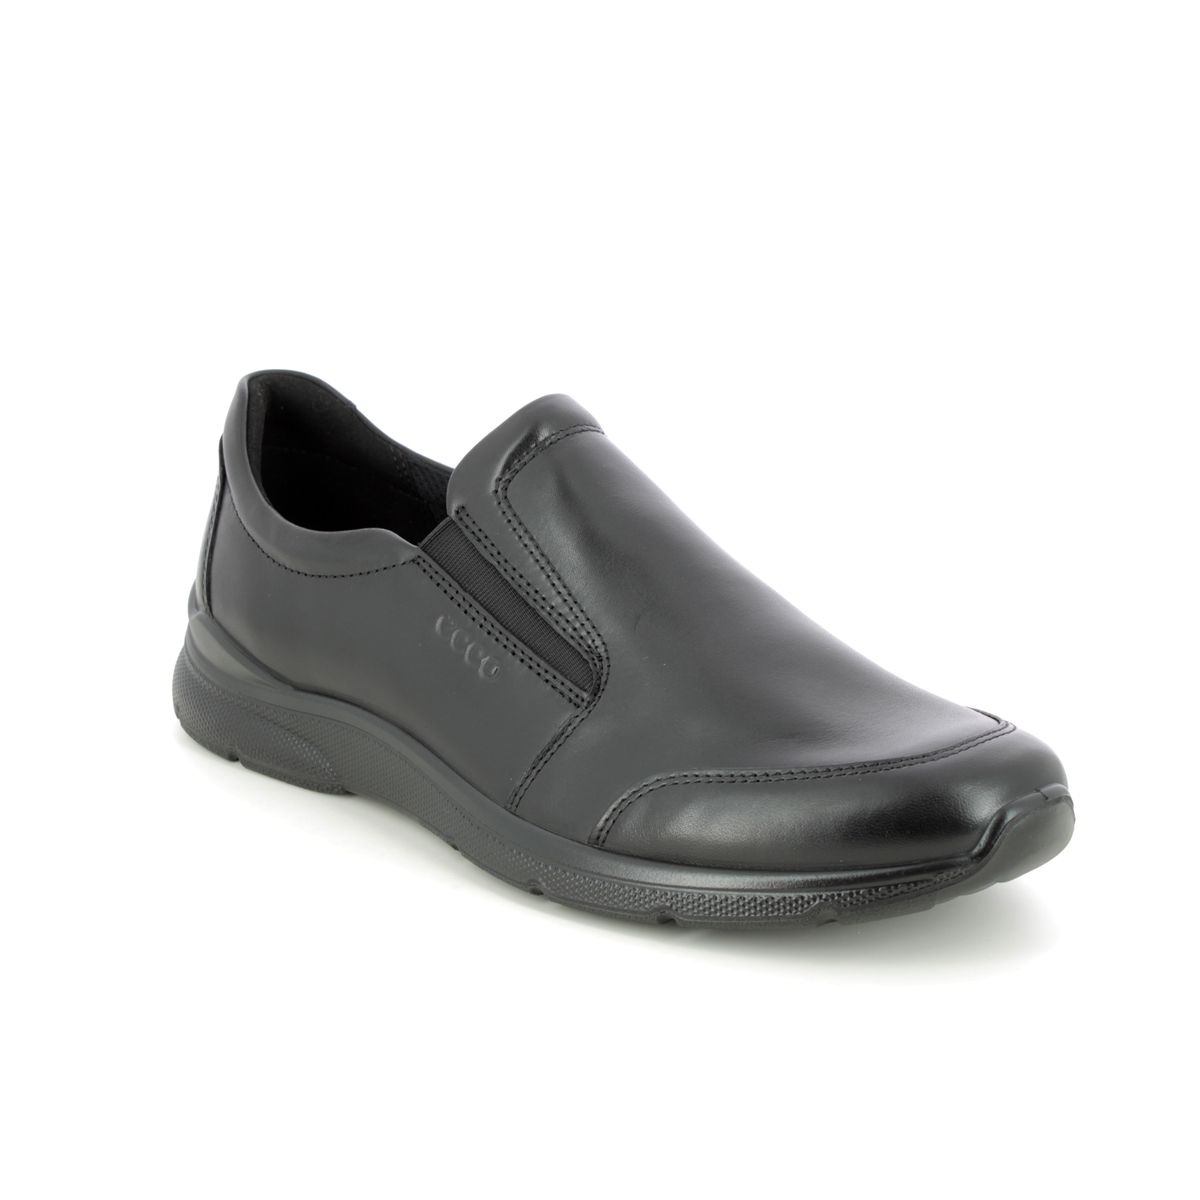 Ecco Irving Slip-On Black Leather Mens Slip-On Shoes 511684-11001 In Size 40 In Plain Black Leather